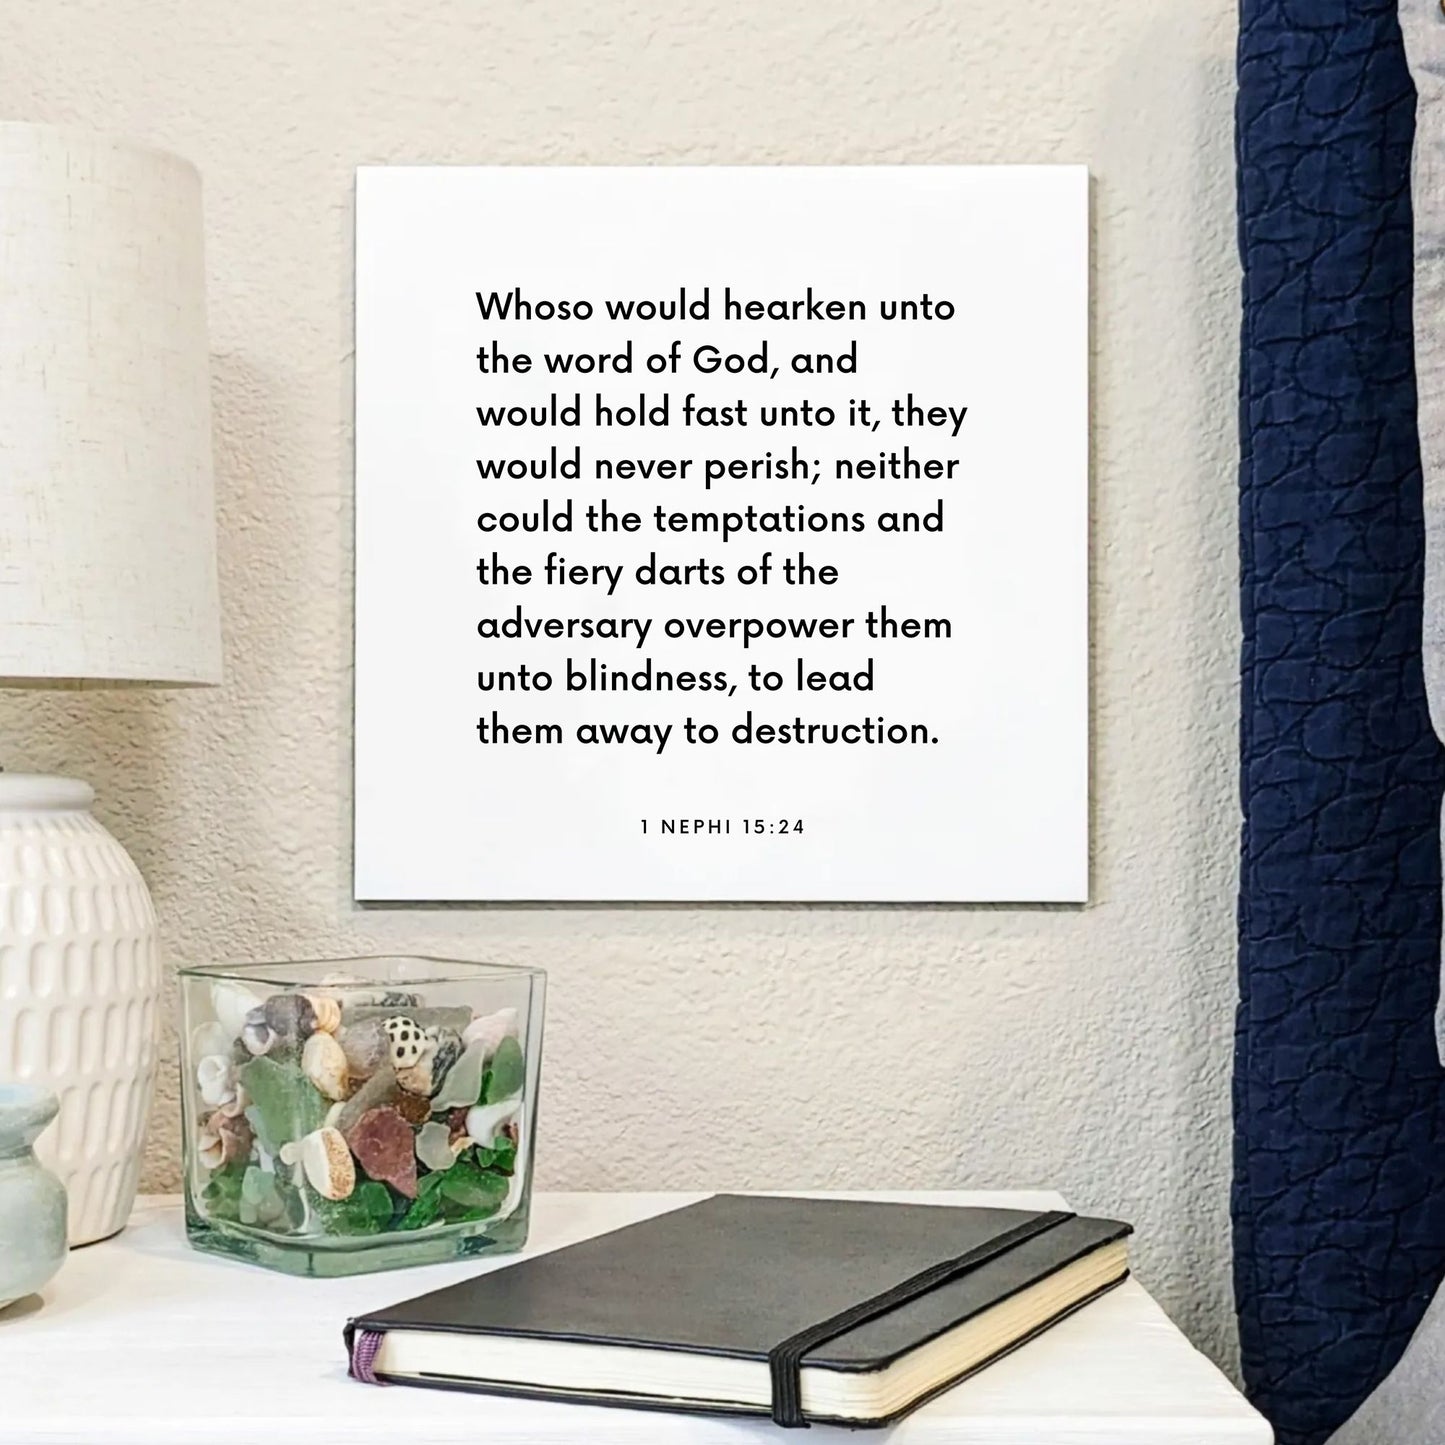 Bedside mouting of the scripture tile for 1 Nephi 15:24 - "Whoso would hearken unto the word of God"